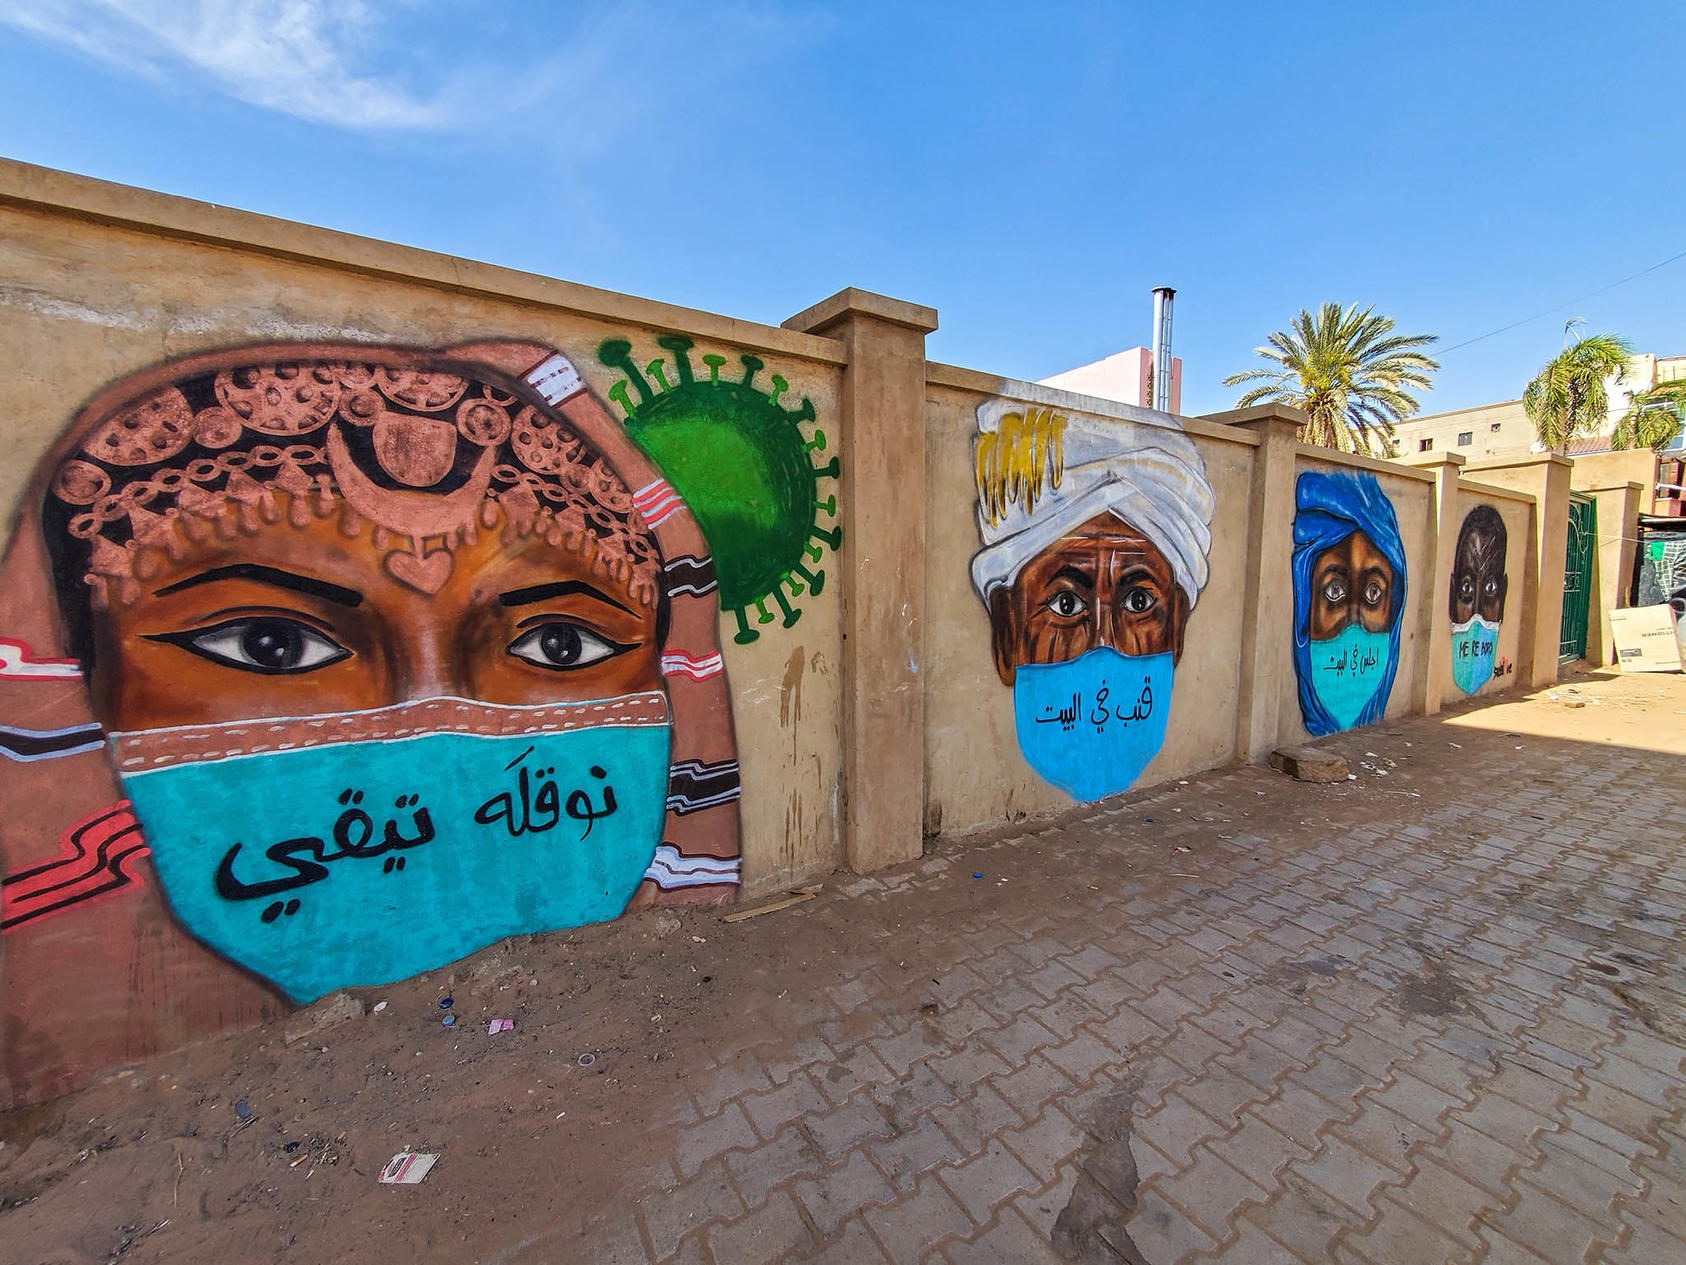 Assil Diab’s mural of Sudanese people from different tribes all wearing masks saying "stay at home" in their own dialects. The mural won a dissemination award from UNESCO in 2020.